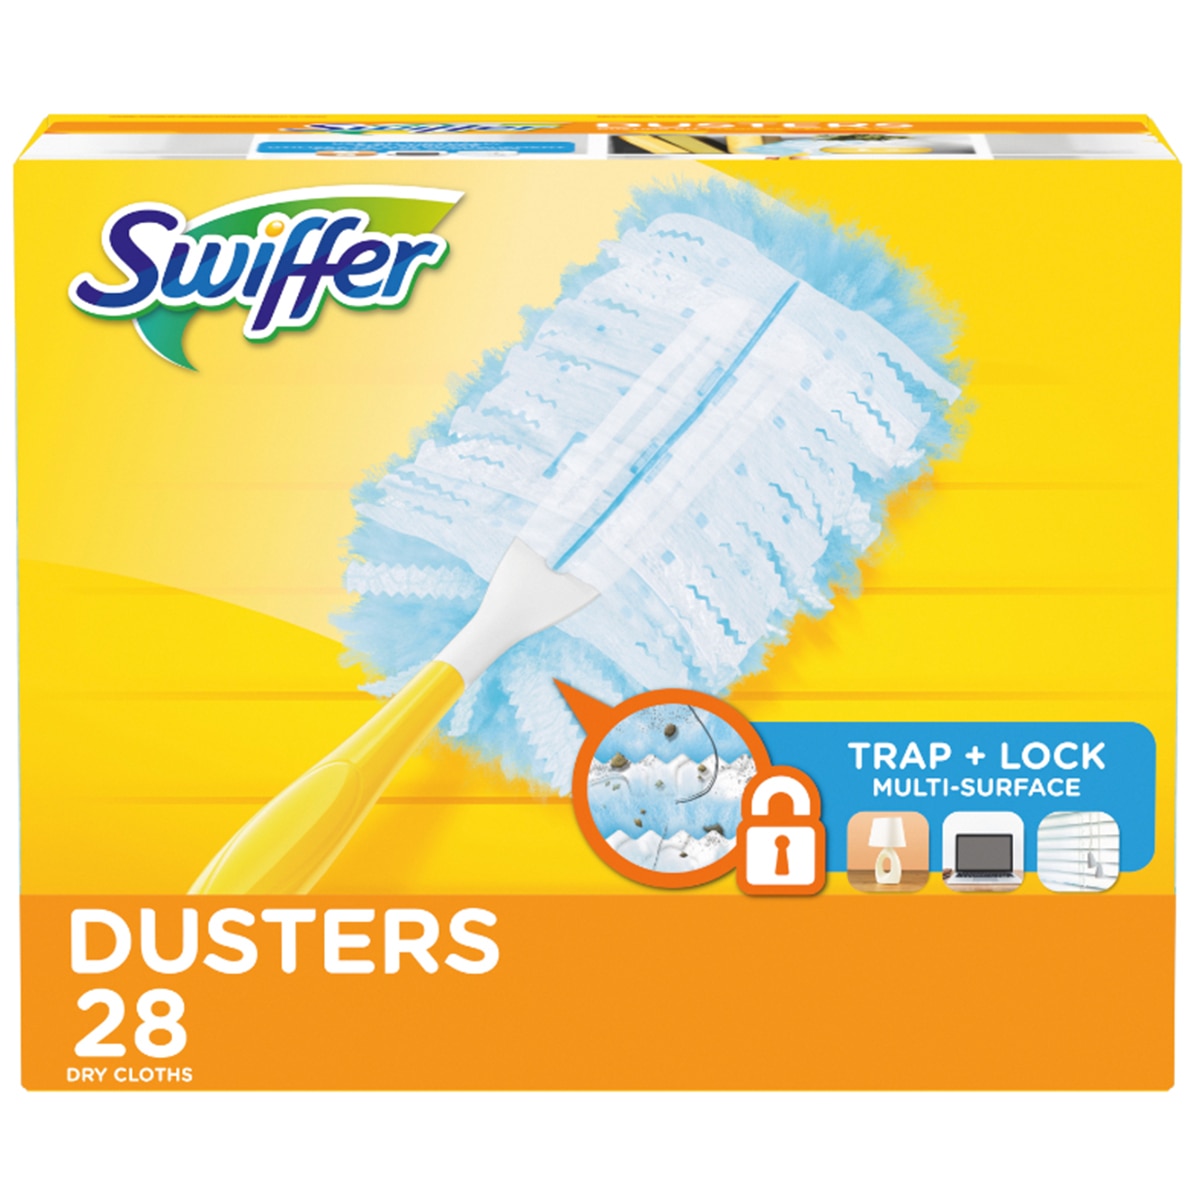 10 Count Swiffer Dusters Disposable Cleaning Dusters Refills Unscented 